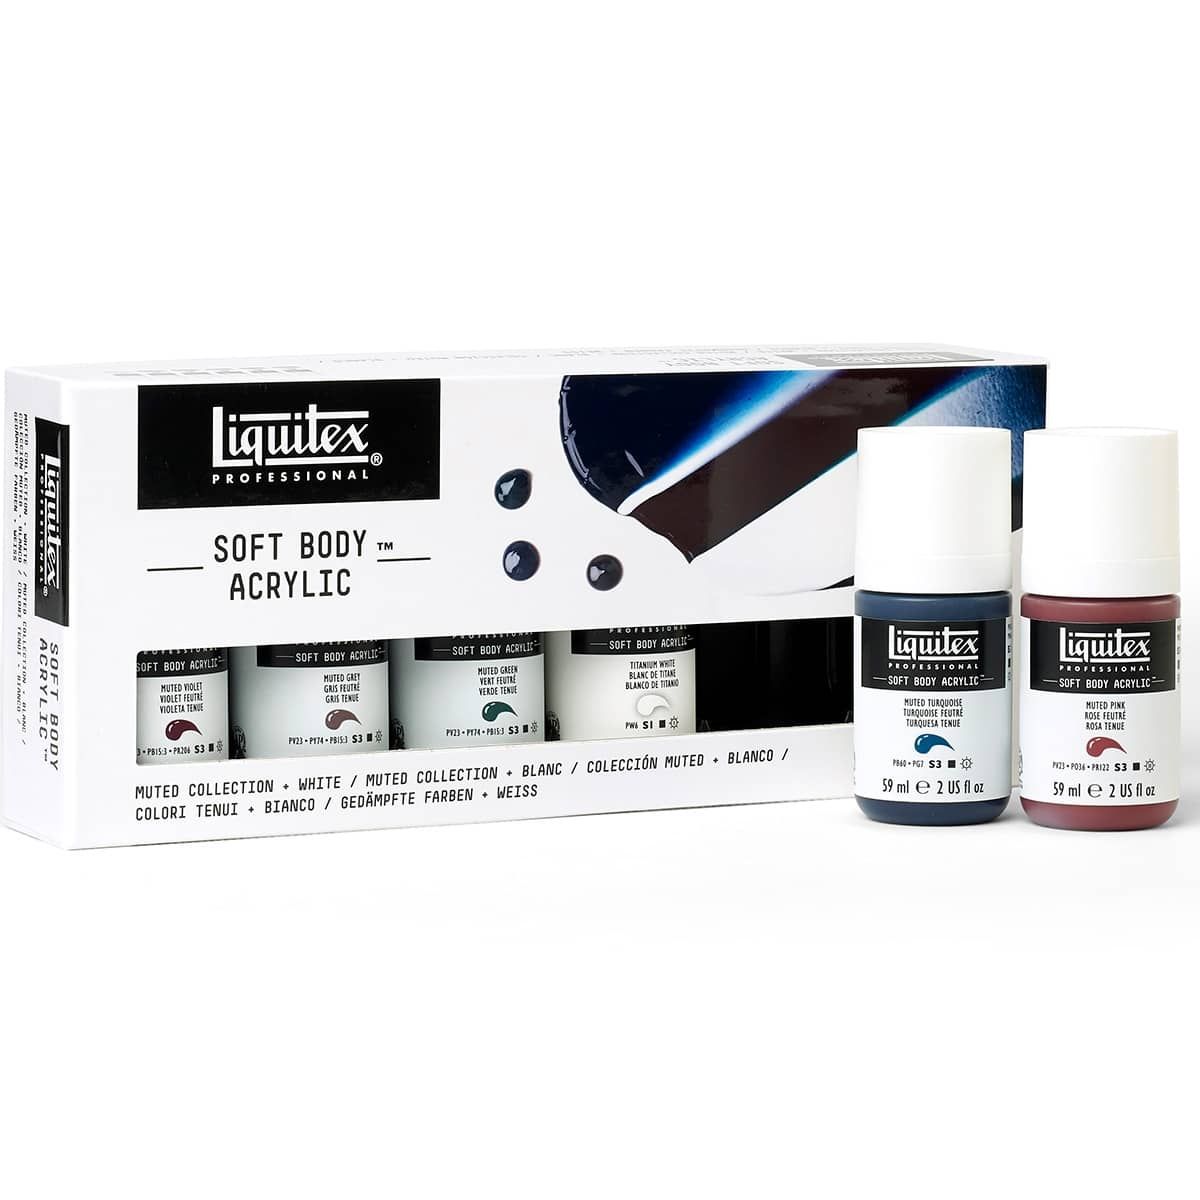 Liquitex Soft Body Acrylic Muted Colors Set of 6